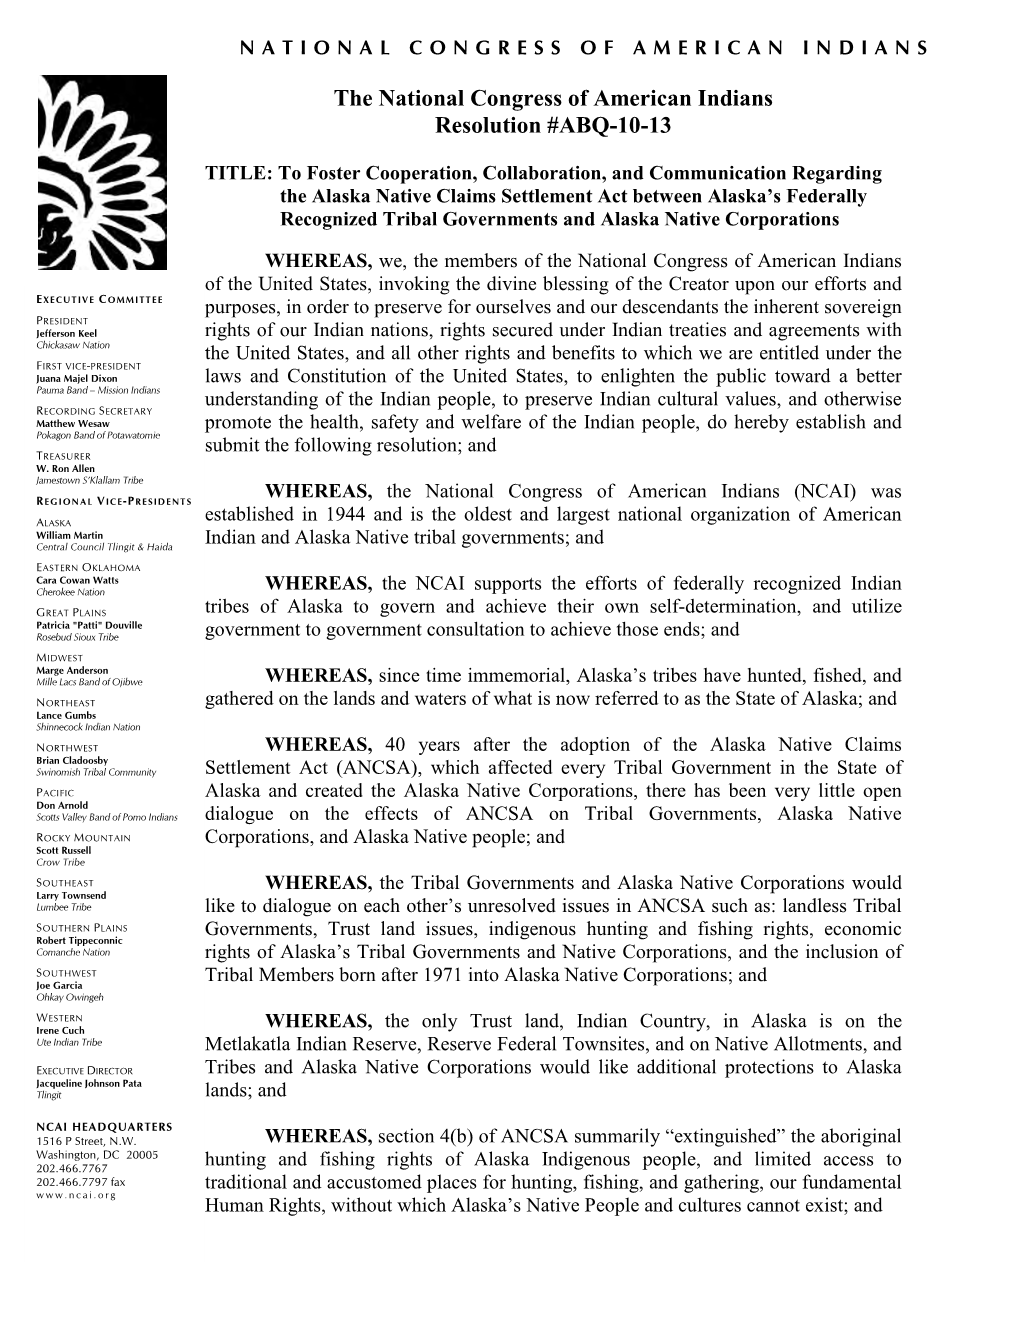 The National Congress of American Indians Resolution #ABQ-10-13